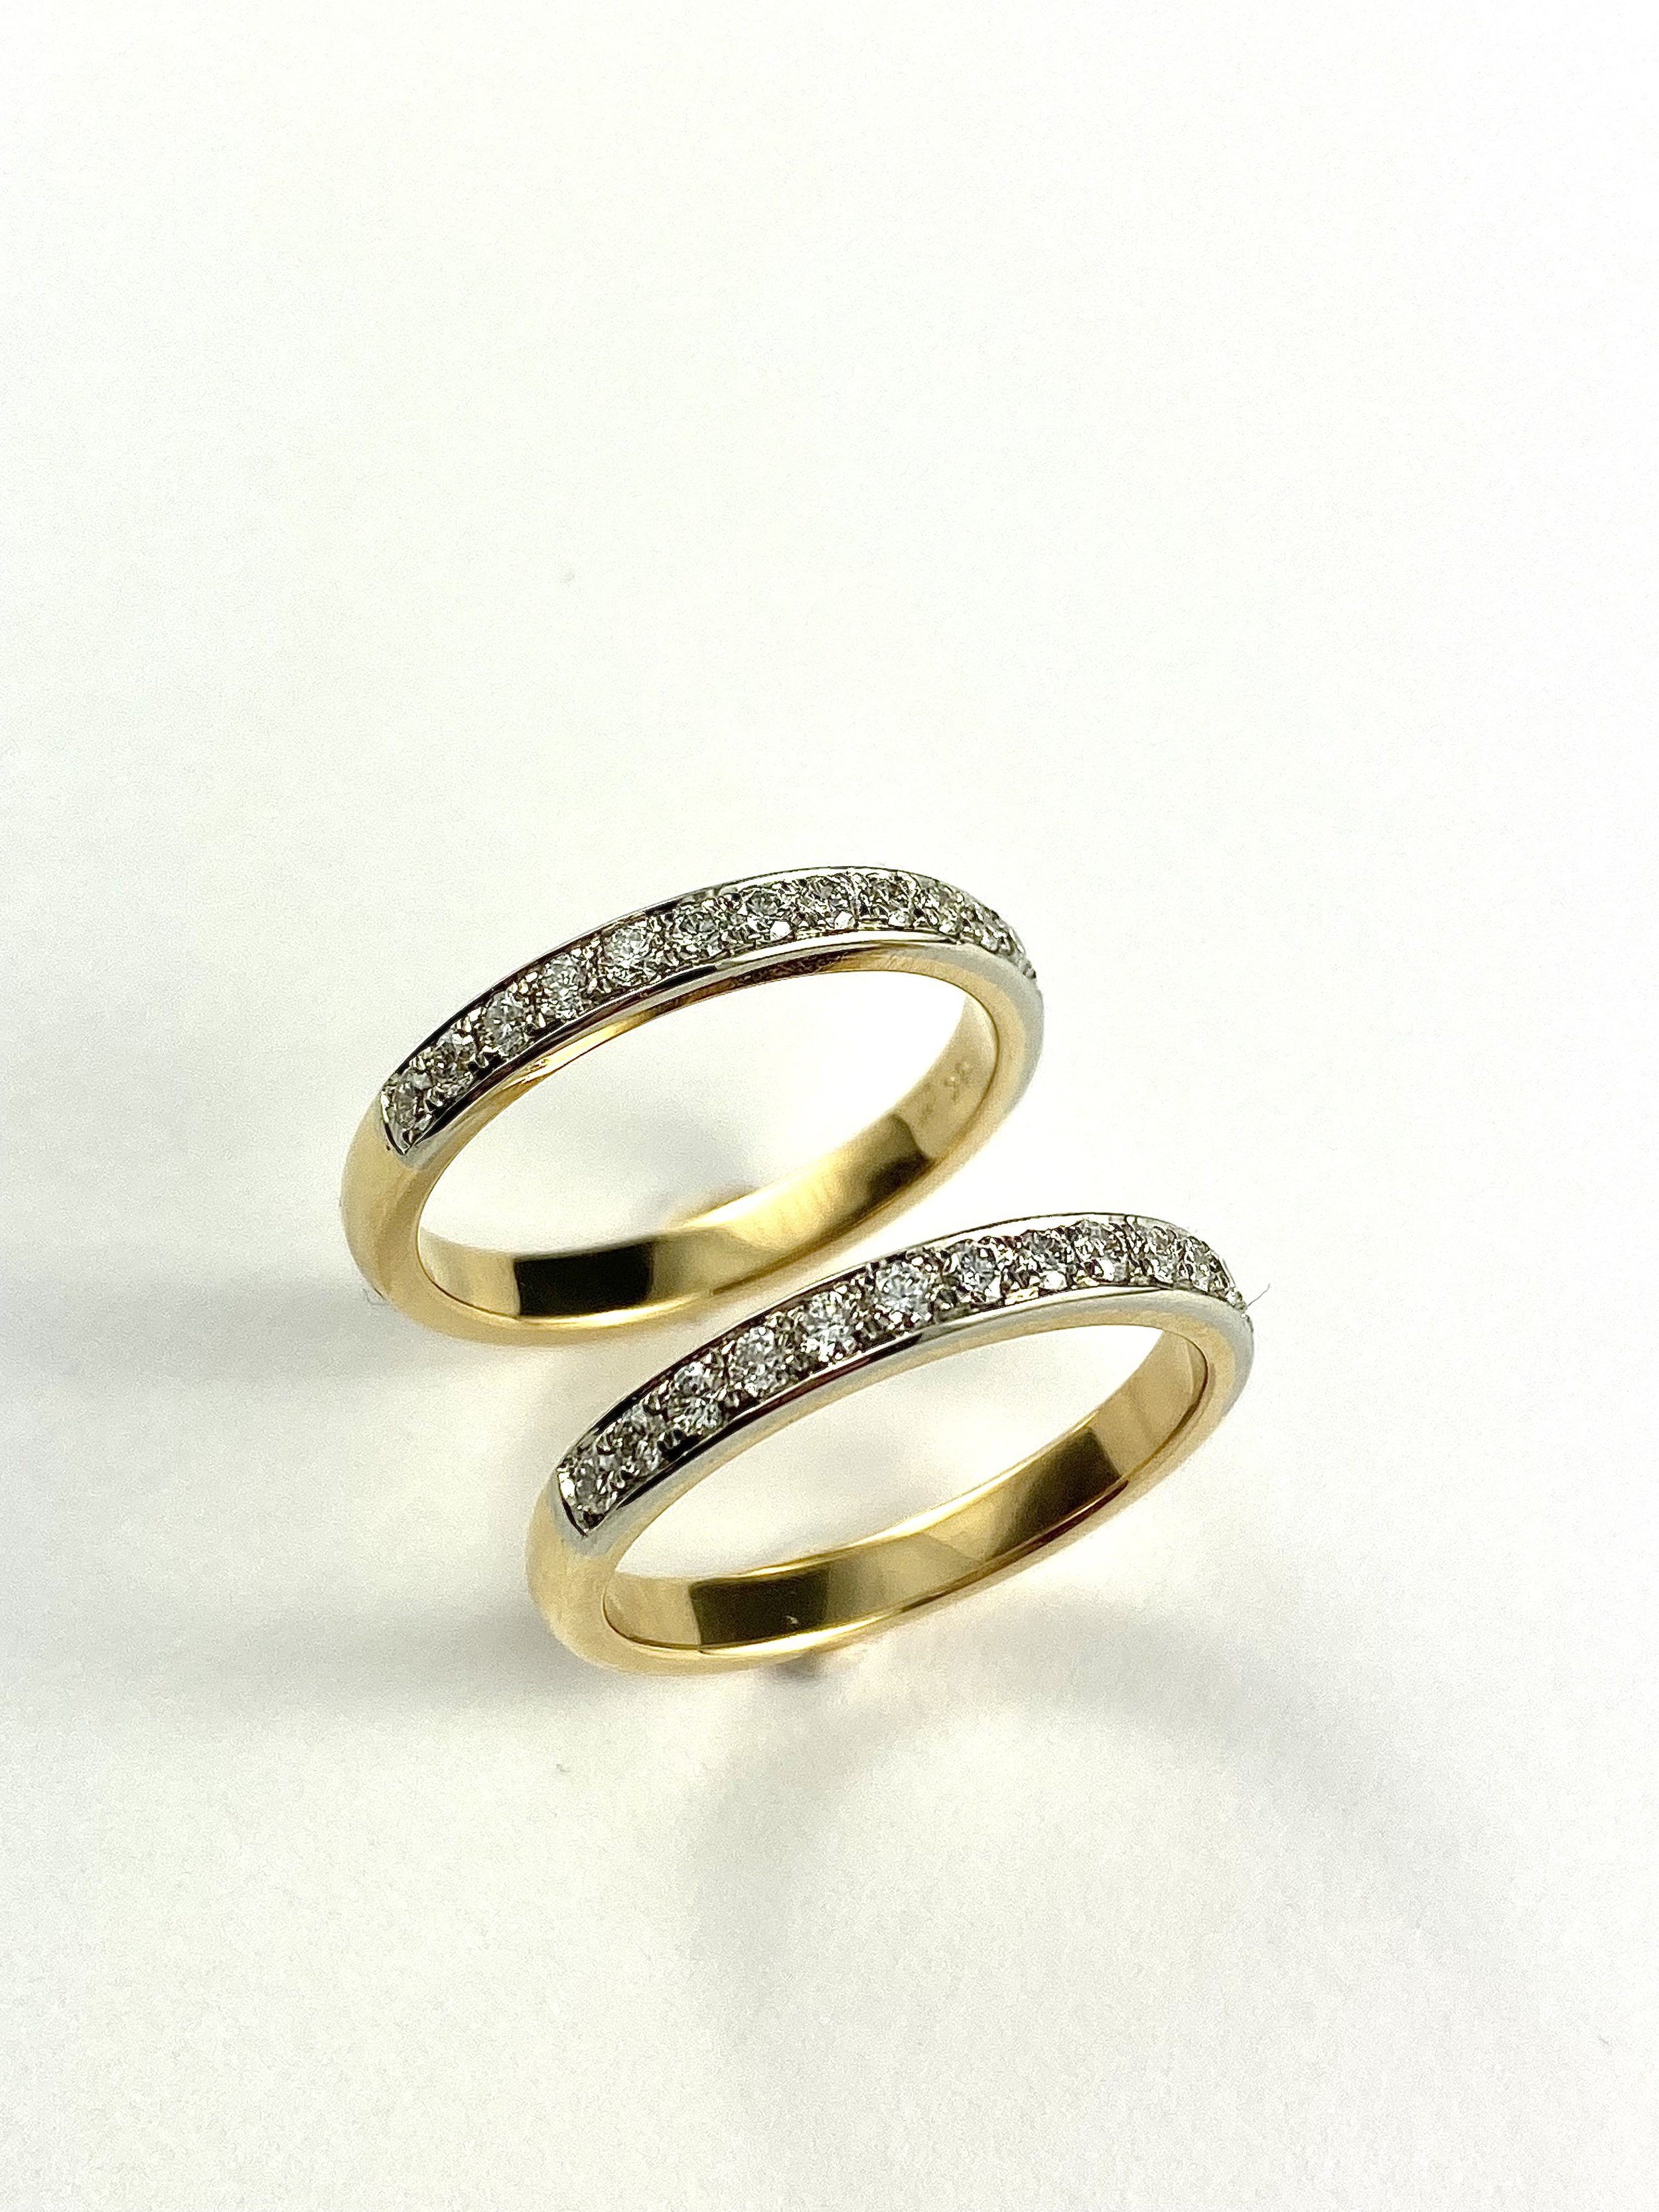 19K White and 18K Yellow Gold Diamond Pave Bands